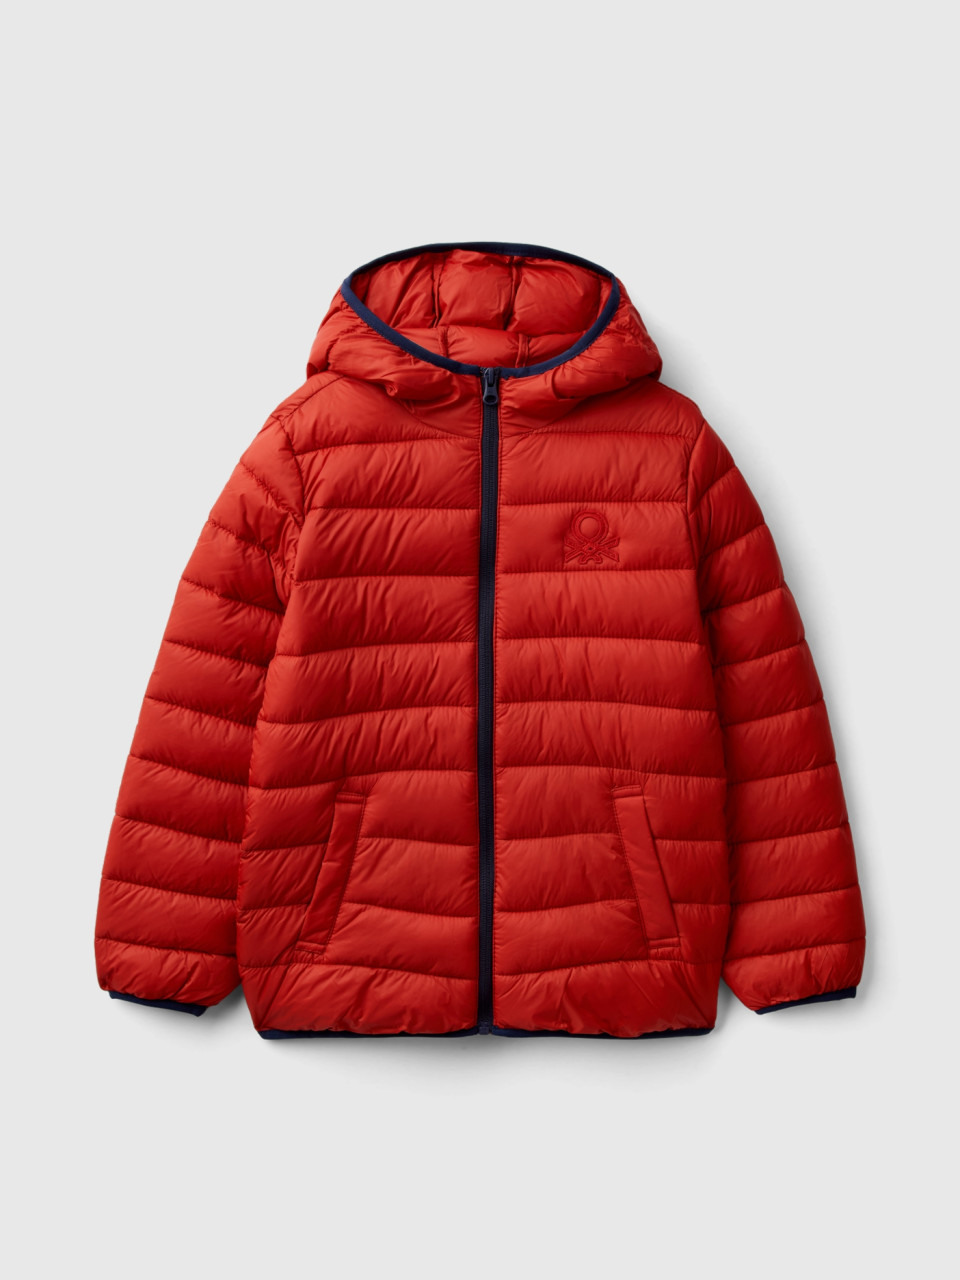 Benetton, Padded Jacket With Hood, Brick Red, Kids